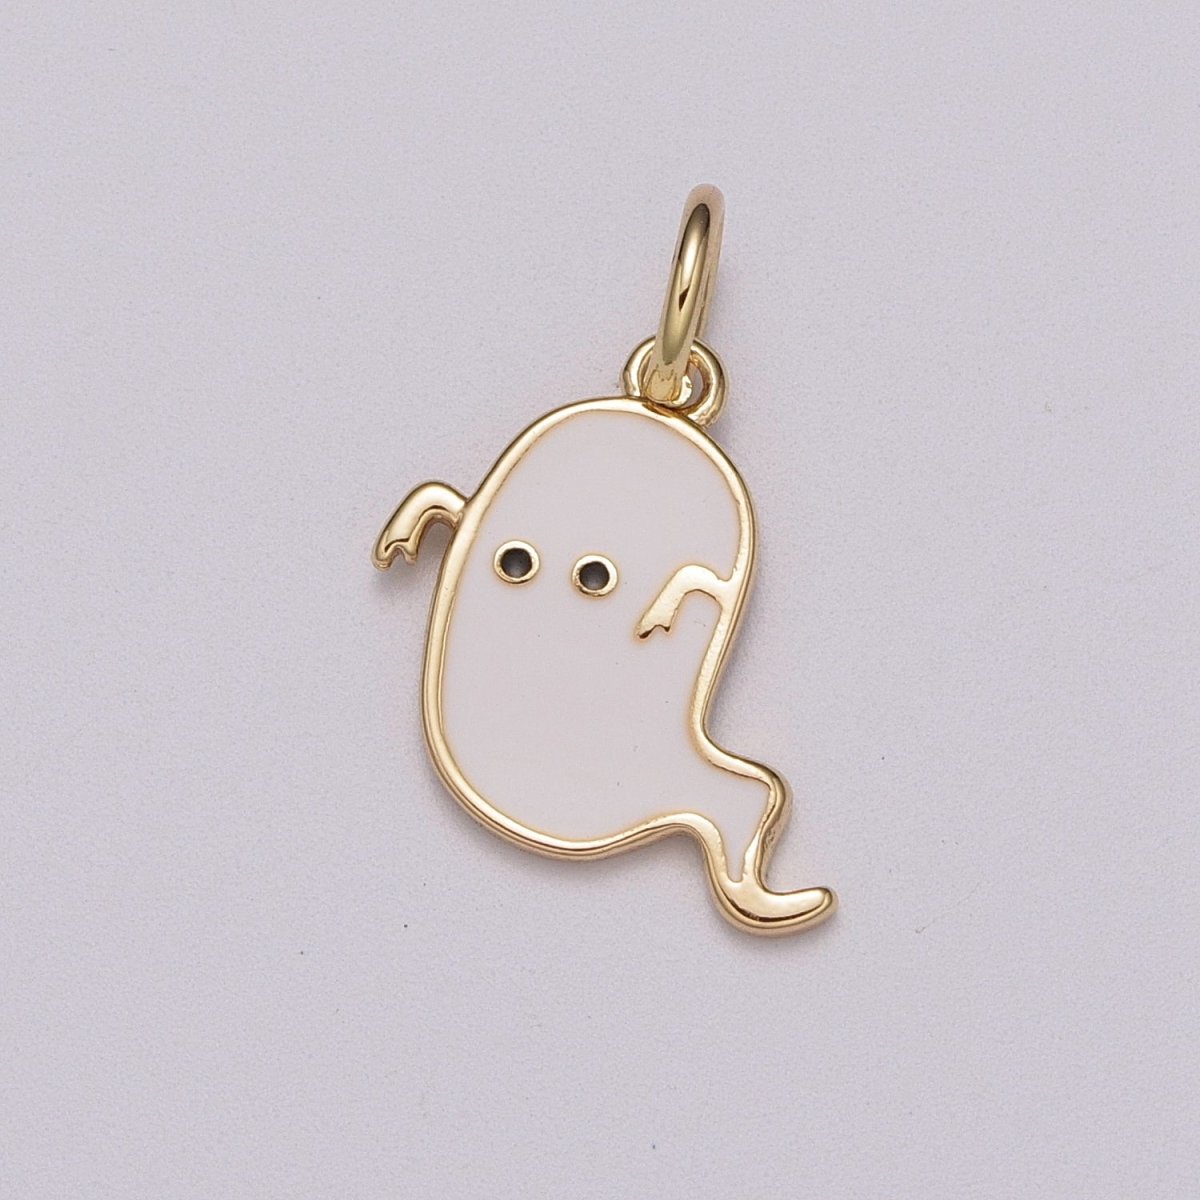 White Ghost Charm, Gold Enamel Cute Scary Haunted Halloween Pendant Jewelry Inspired M-857 - DLUXCA